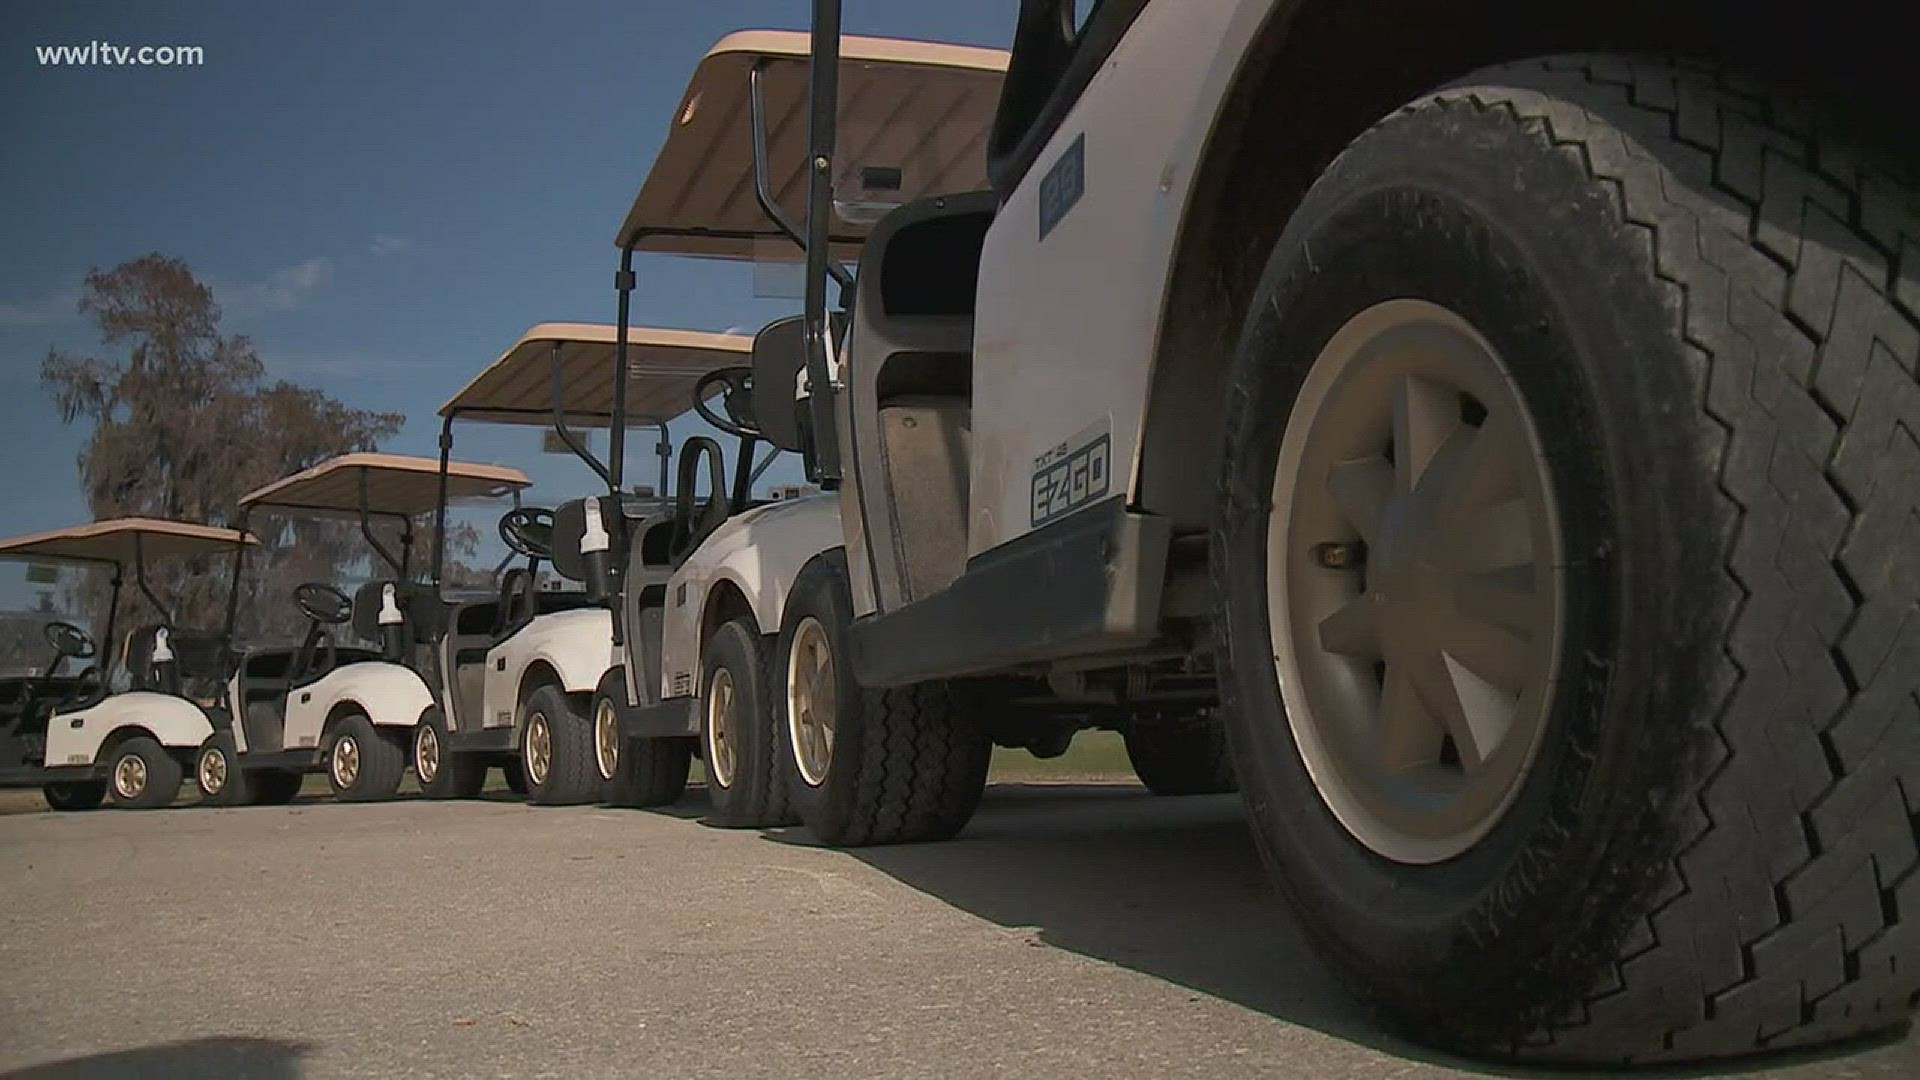 The sheriff in st Charles Parish proposed an ordinance to city council to allow golf carts on certain city streets.